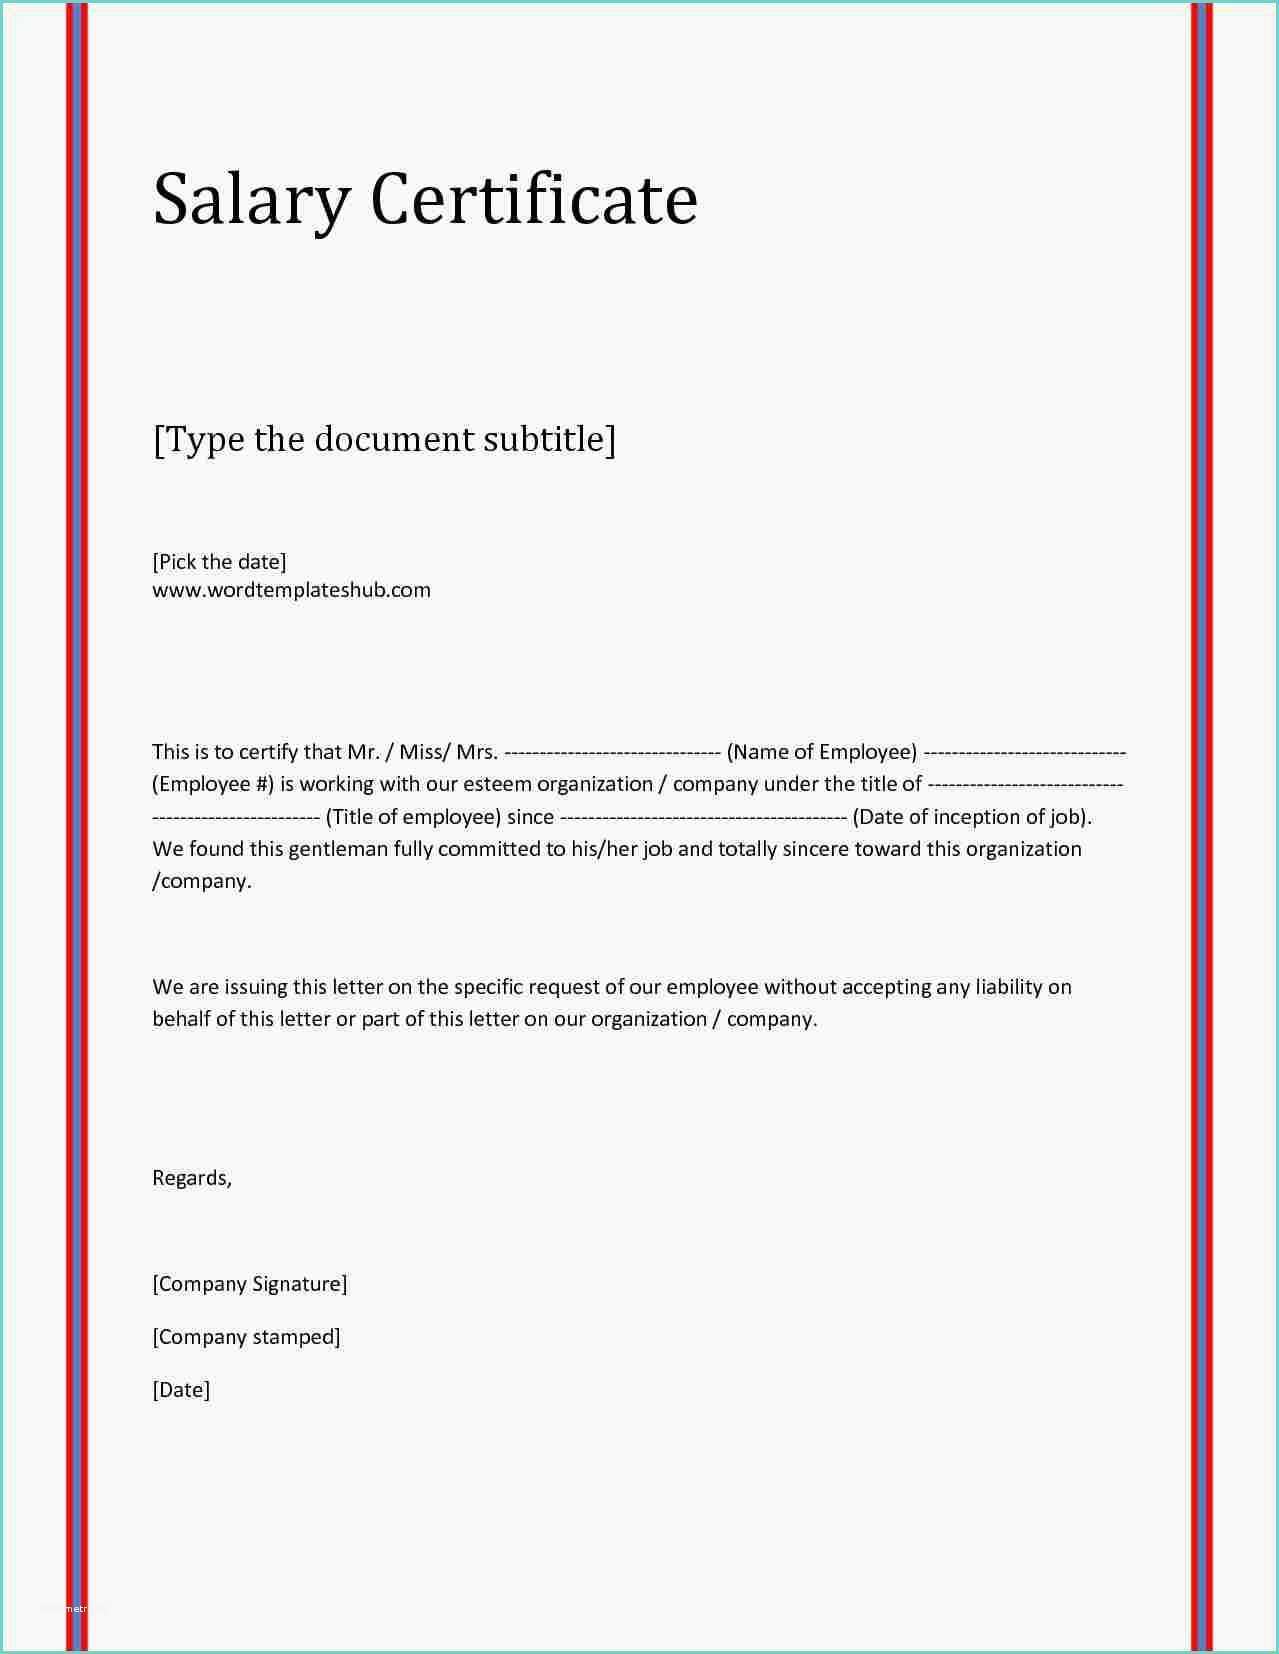 How to Write Certificate 5 Salary Pensation Letter Sample